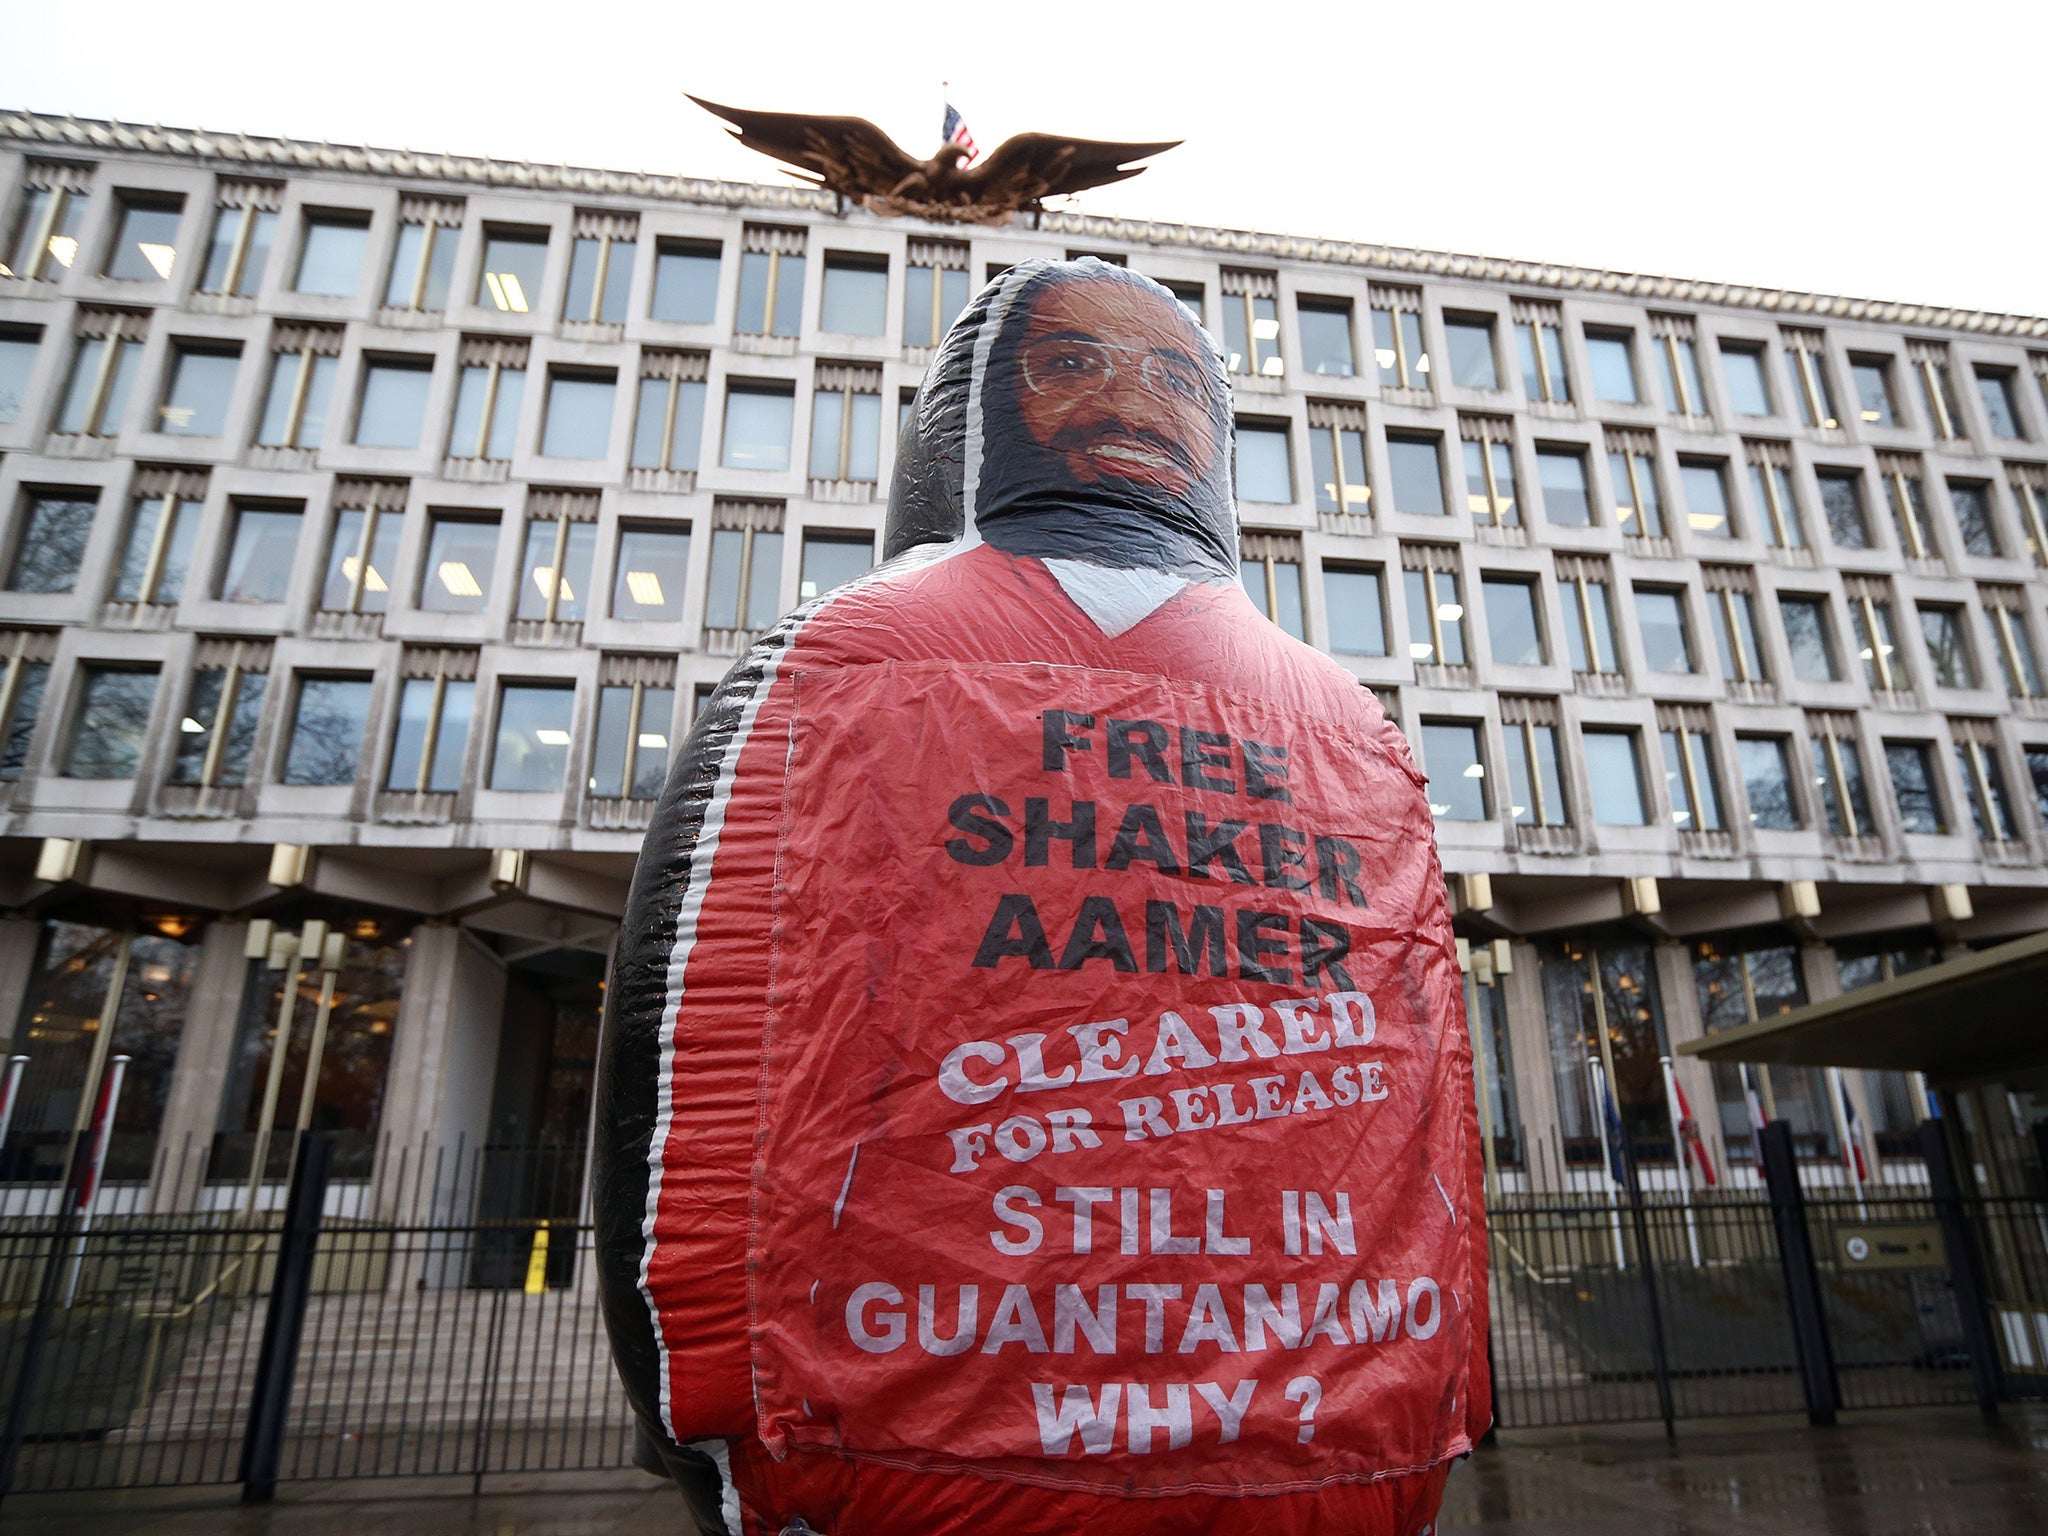 A giant inflatable figure of Shaker Aamer, the last Briton to be detained in Guantanamo Bay, is pictured during a protest by the We Stand With Shaker campaign group outside the U.S embassy in London, England.